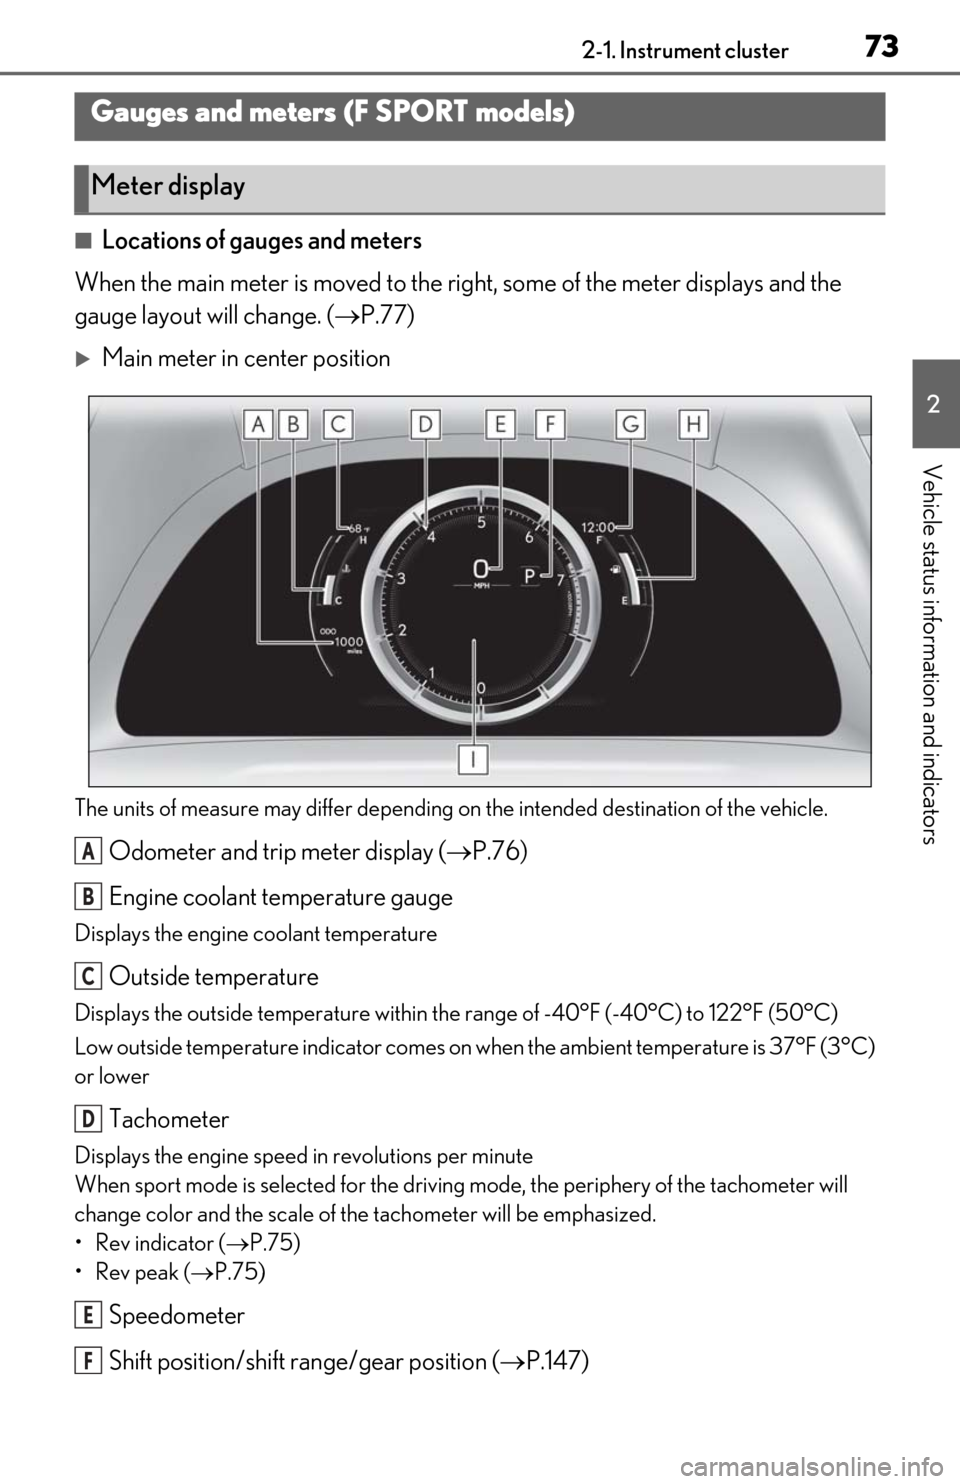 Lexus ES350 2020  Owners Manual / LEXUS 2020 ES350 FROM OCT. 2019 PROD. OWNERS MANUAL (OM06194U) 732-1. Instrument cluster
2
Vehicle status information and indicators
■Locations of gauges and meters
When the main meter is moved to the righ t, some of the meter displays and the 
gauge layout wil